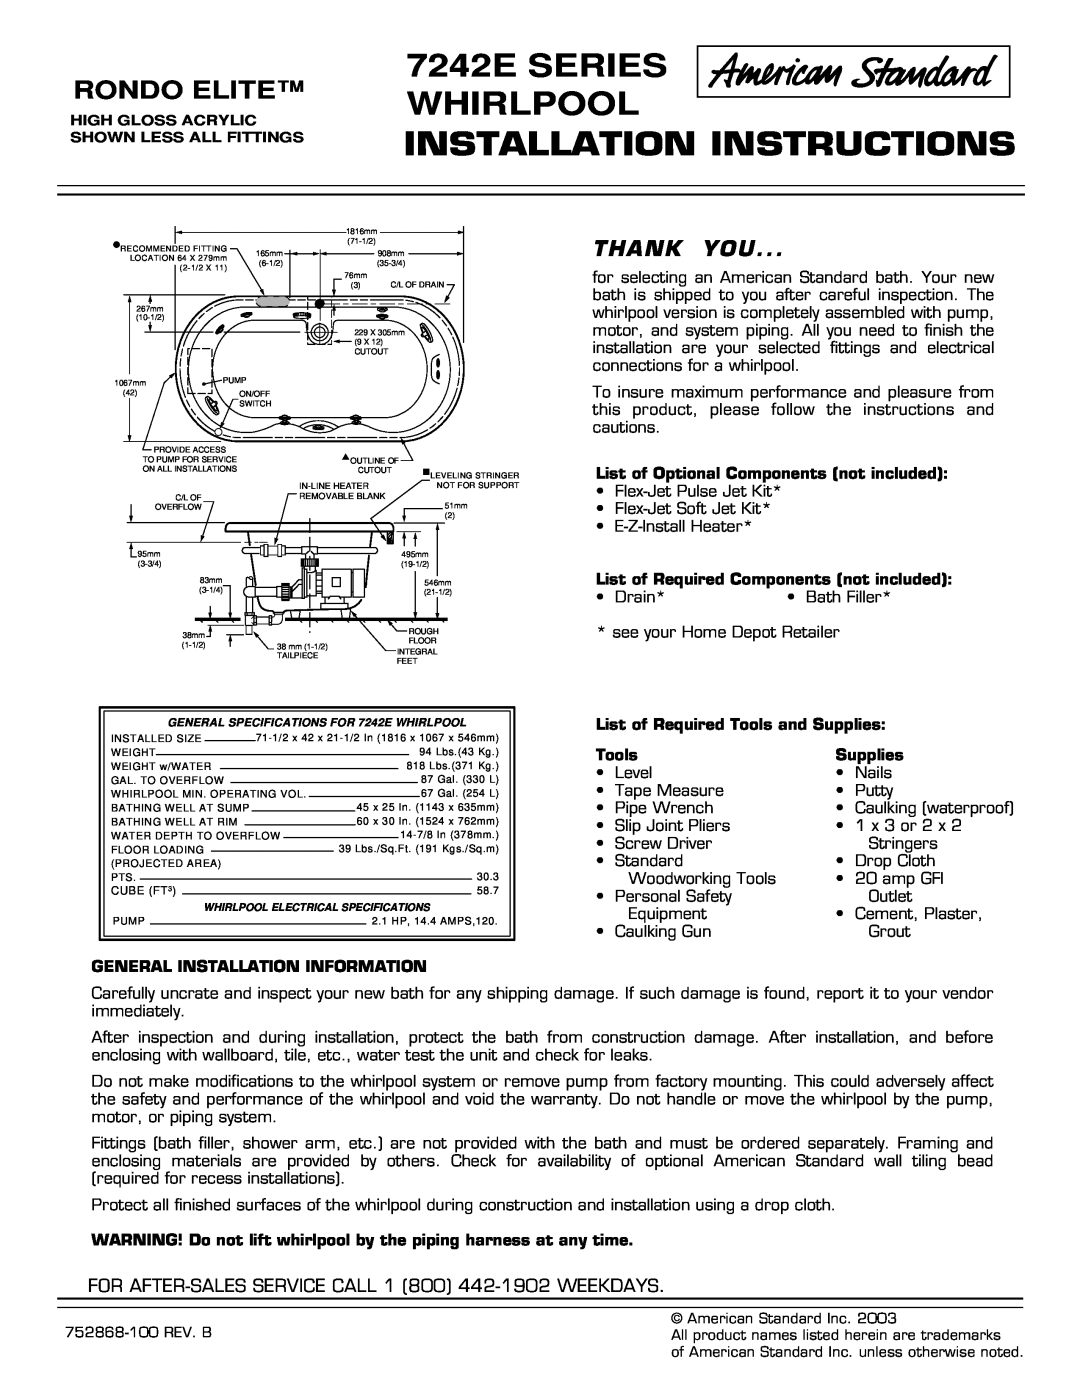 American Standard installation instructions 7242E SERIES WHIRLPOOL, Installation Instructions, Rondo Elite, Thank You 